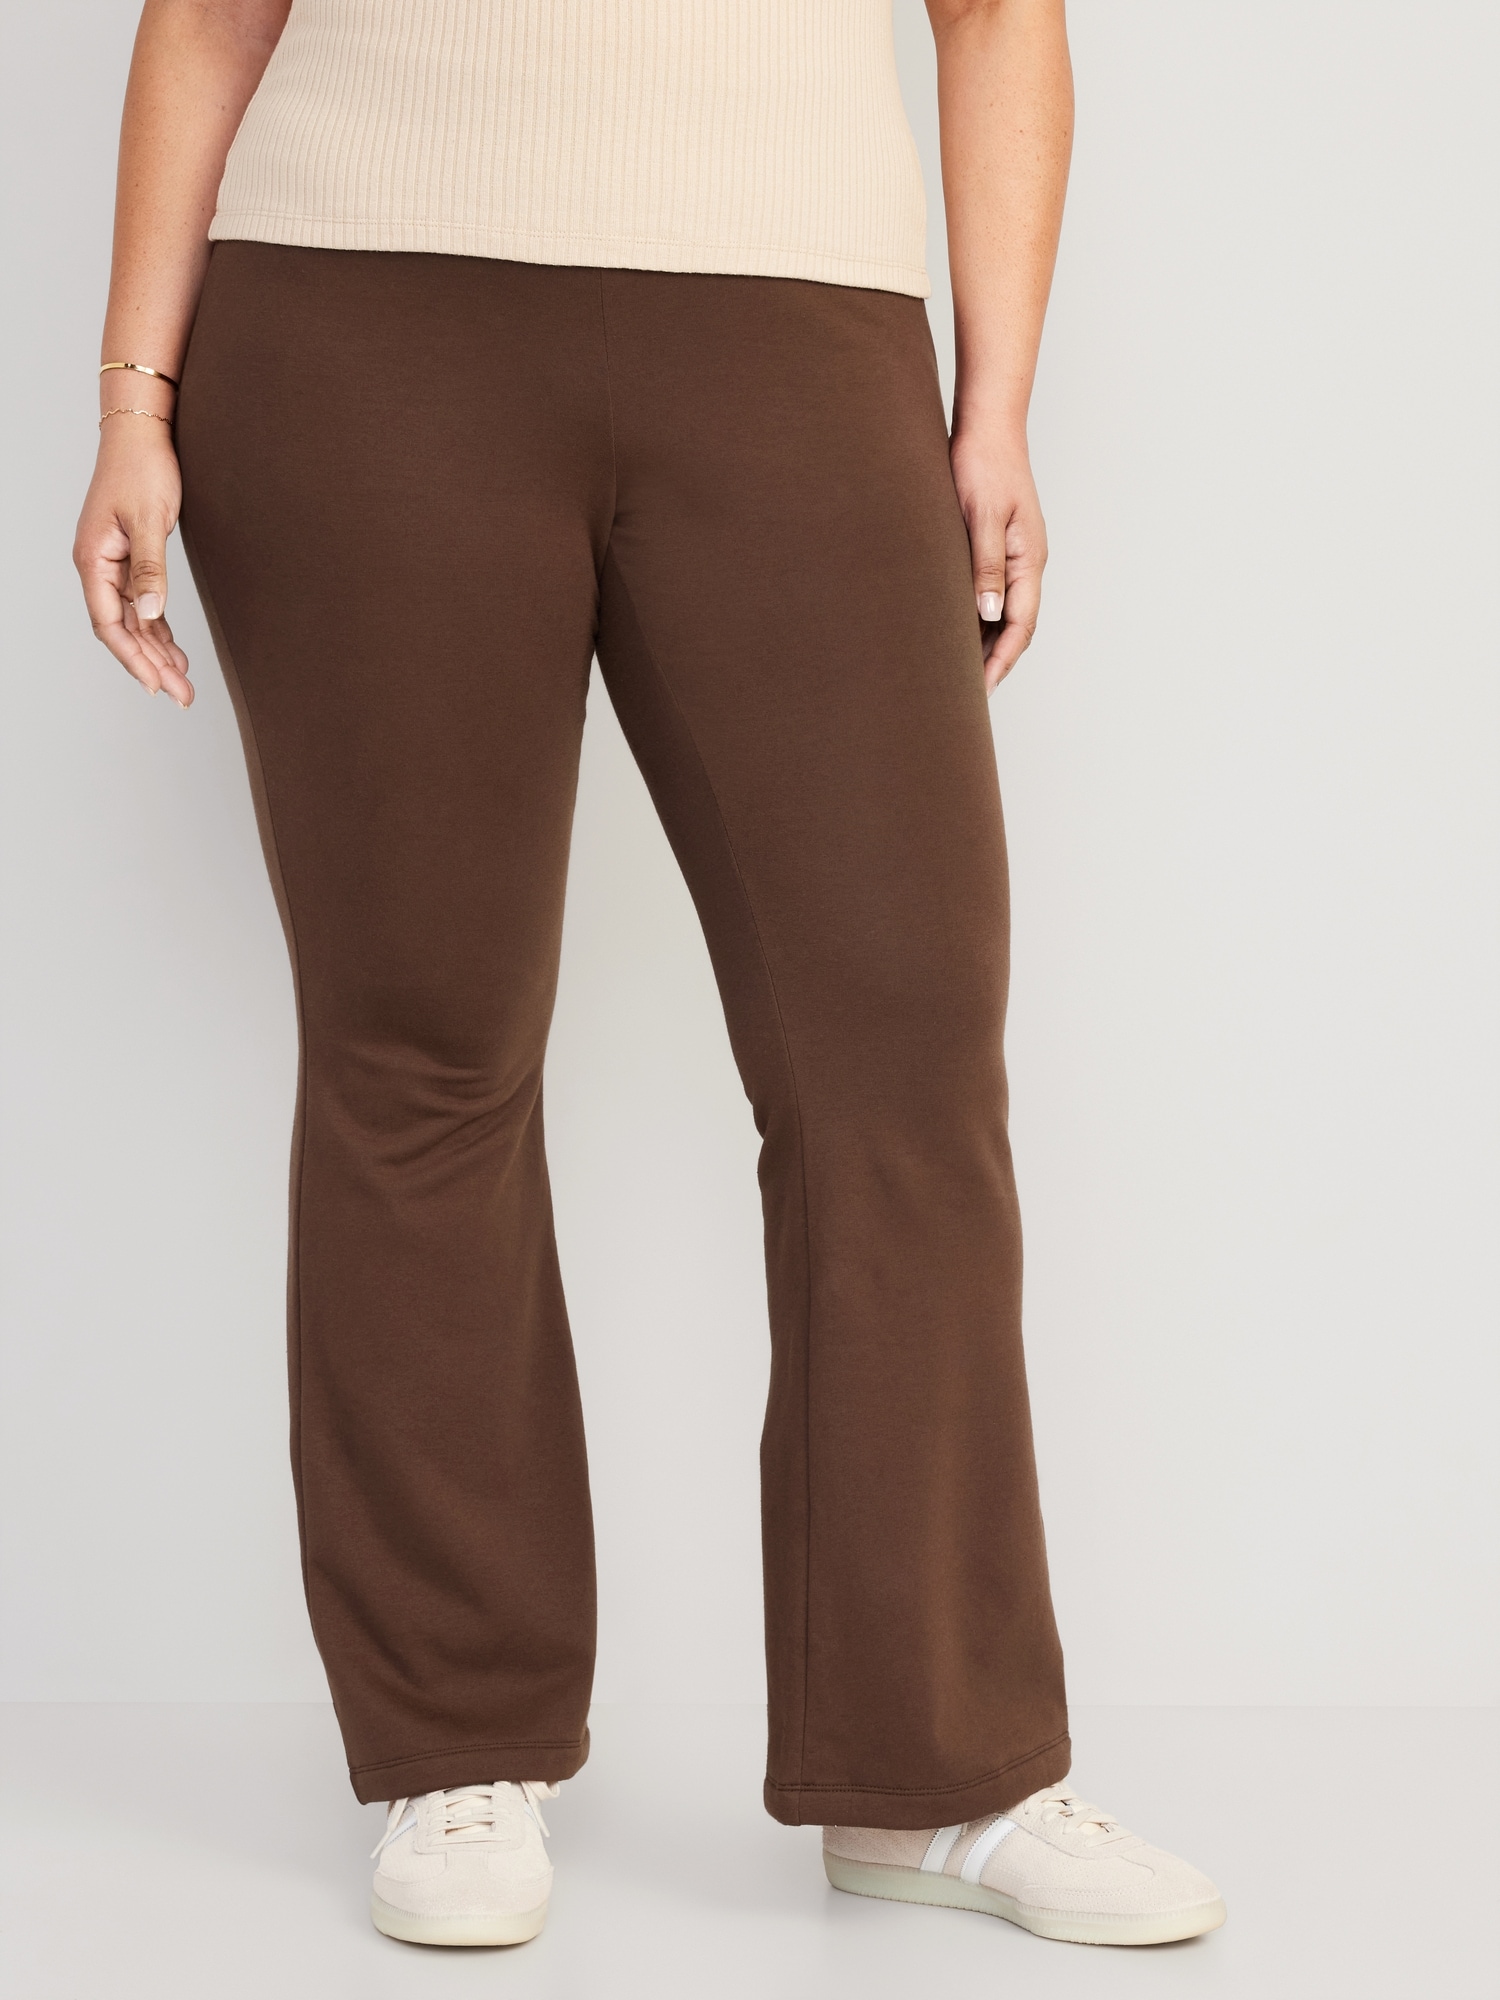 Old Navy Women's Leggings High-Waisted Built-In Warm Fleece-Lined Pants,  Pockets